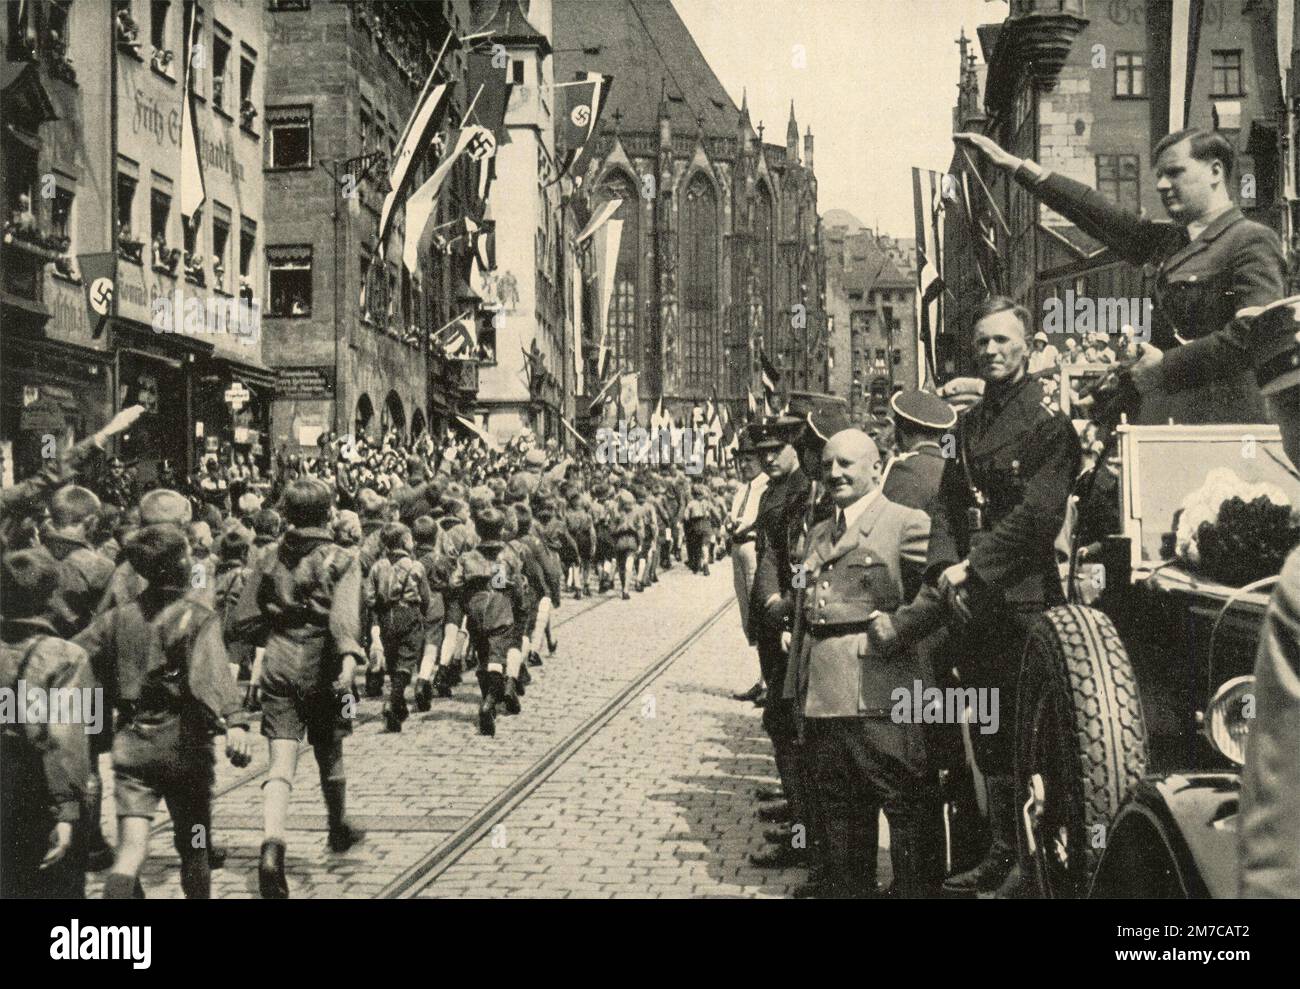 Hitlerjugend children marching in Nurberg, Germany 1933 Stock Photo